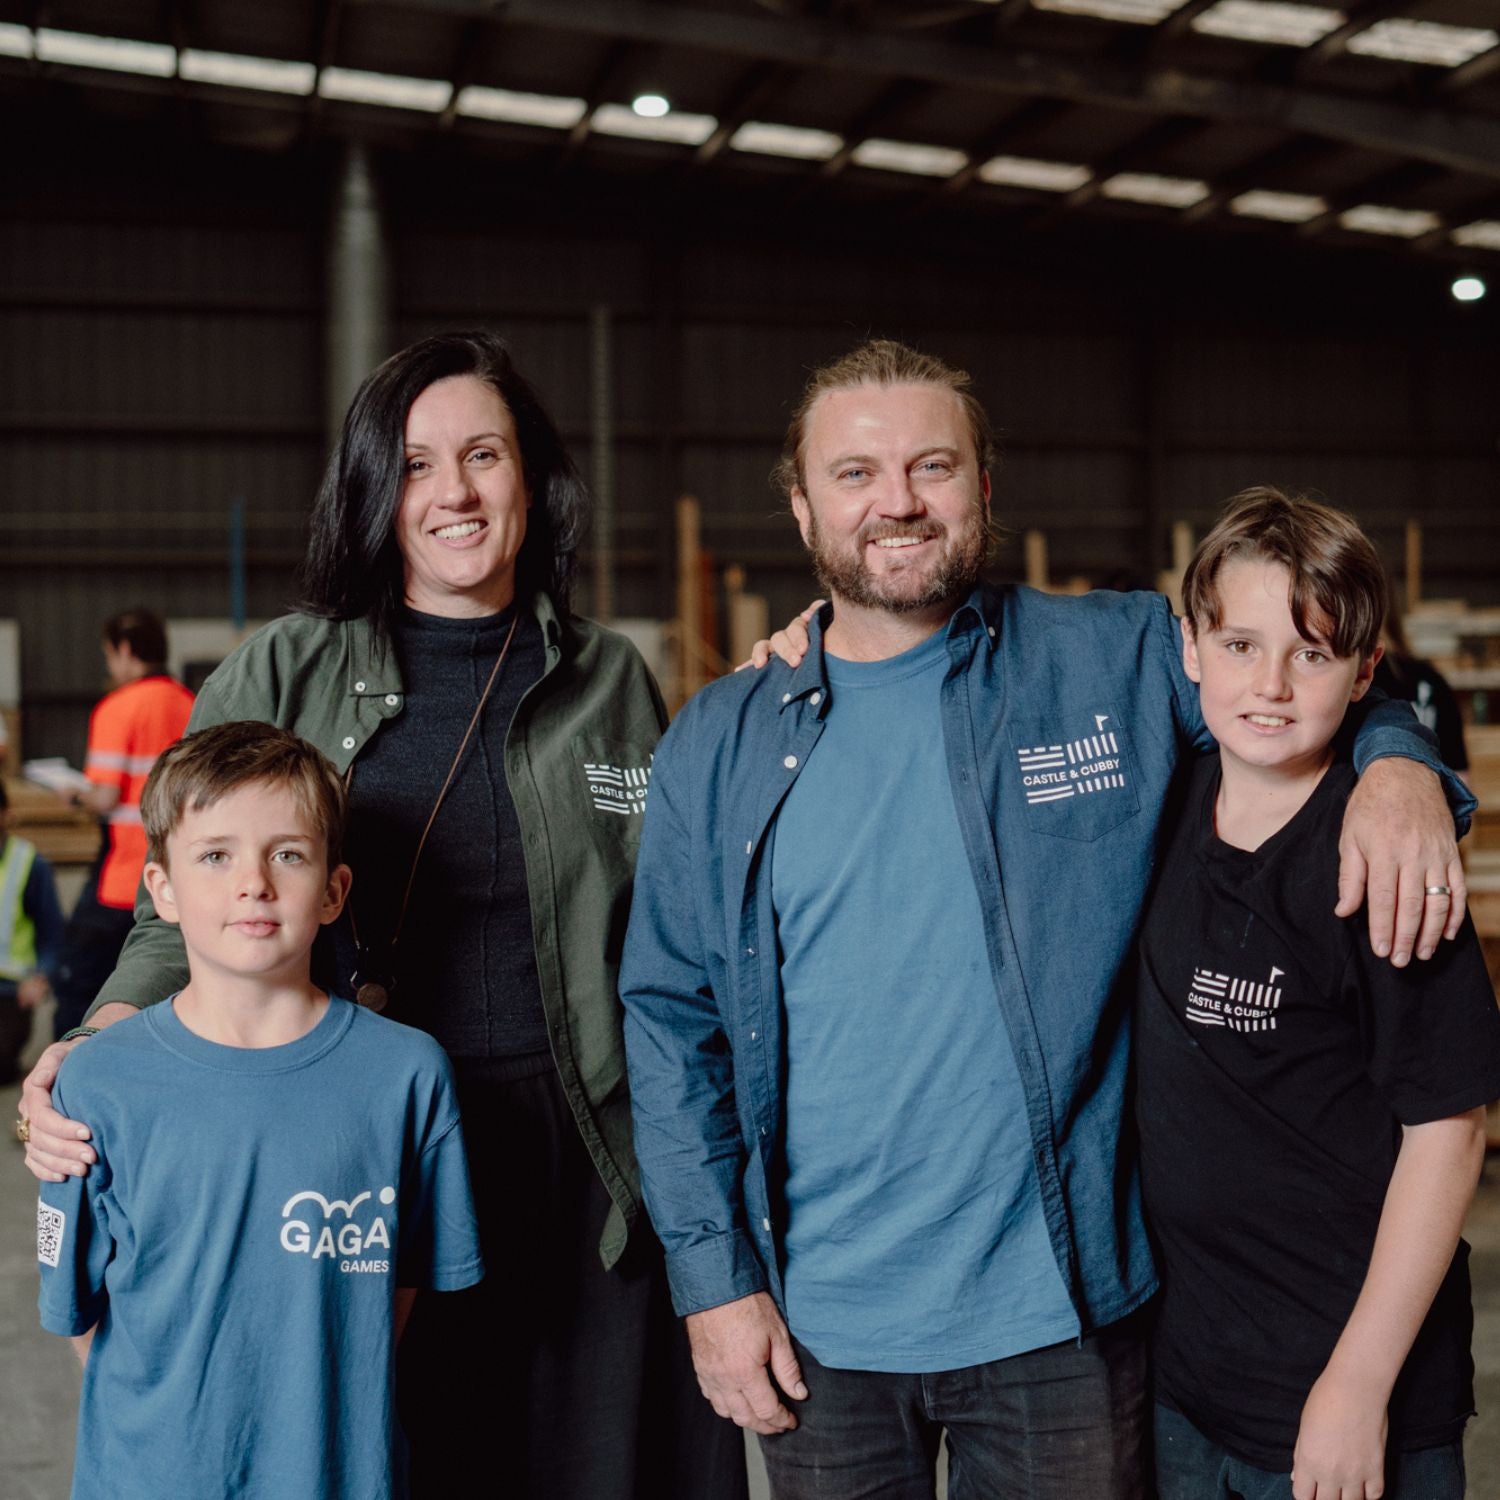 The family owners of Gaga Games and Castle & Cubby, featuring Mum and Dad with their two boys aged 12 and 10, all dressed in branded company clothing, smiling for the camera.